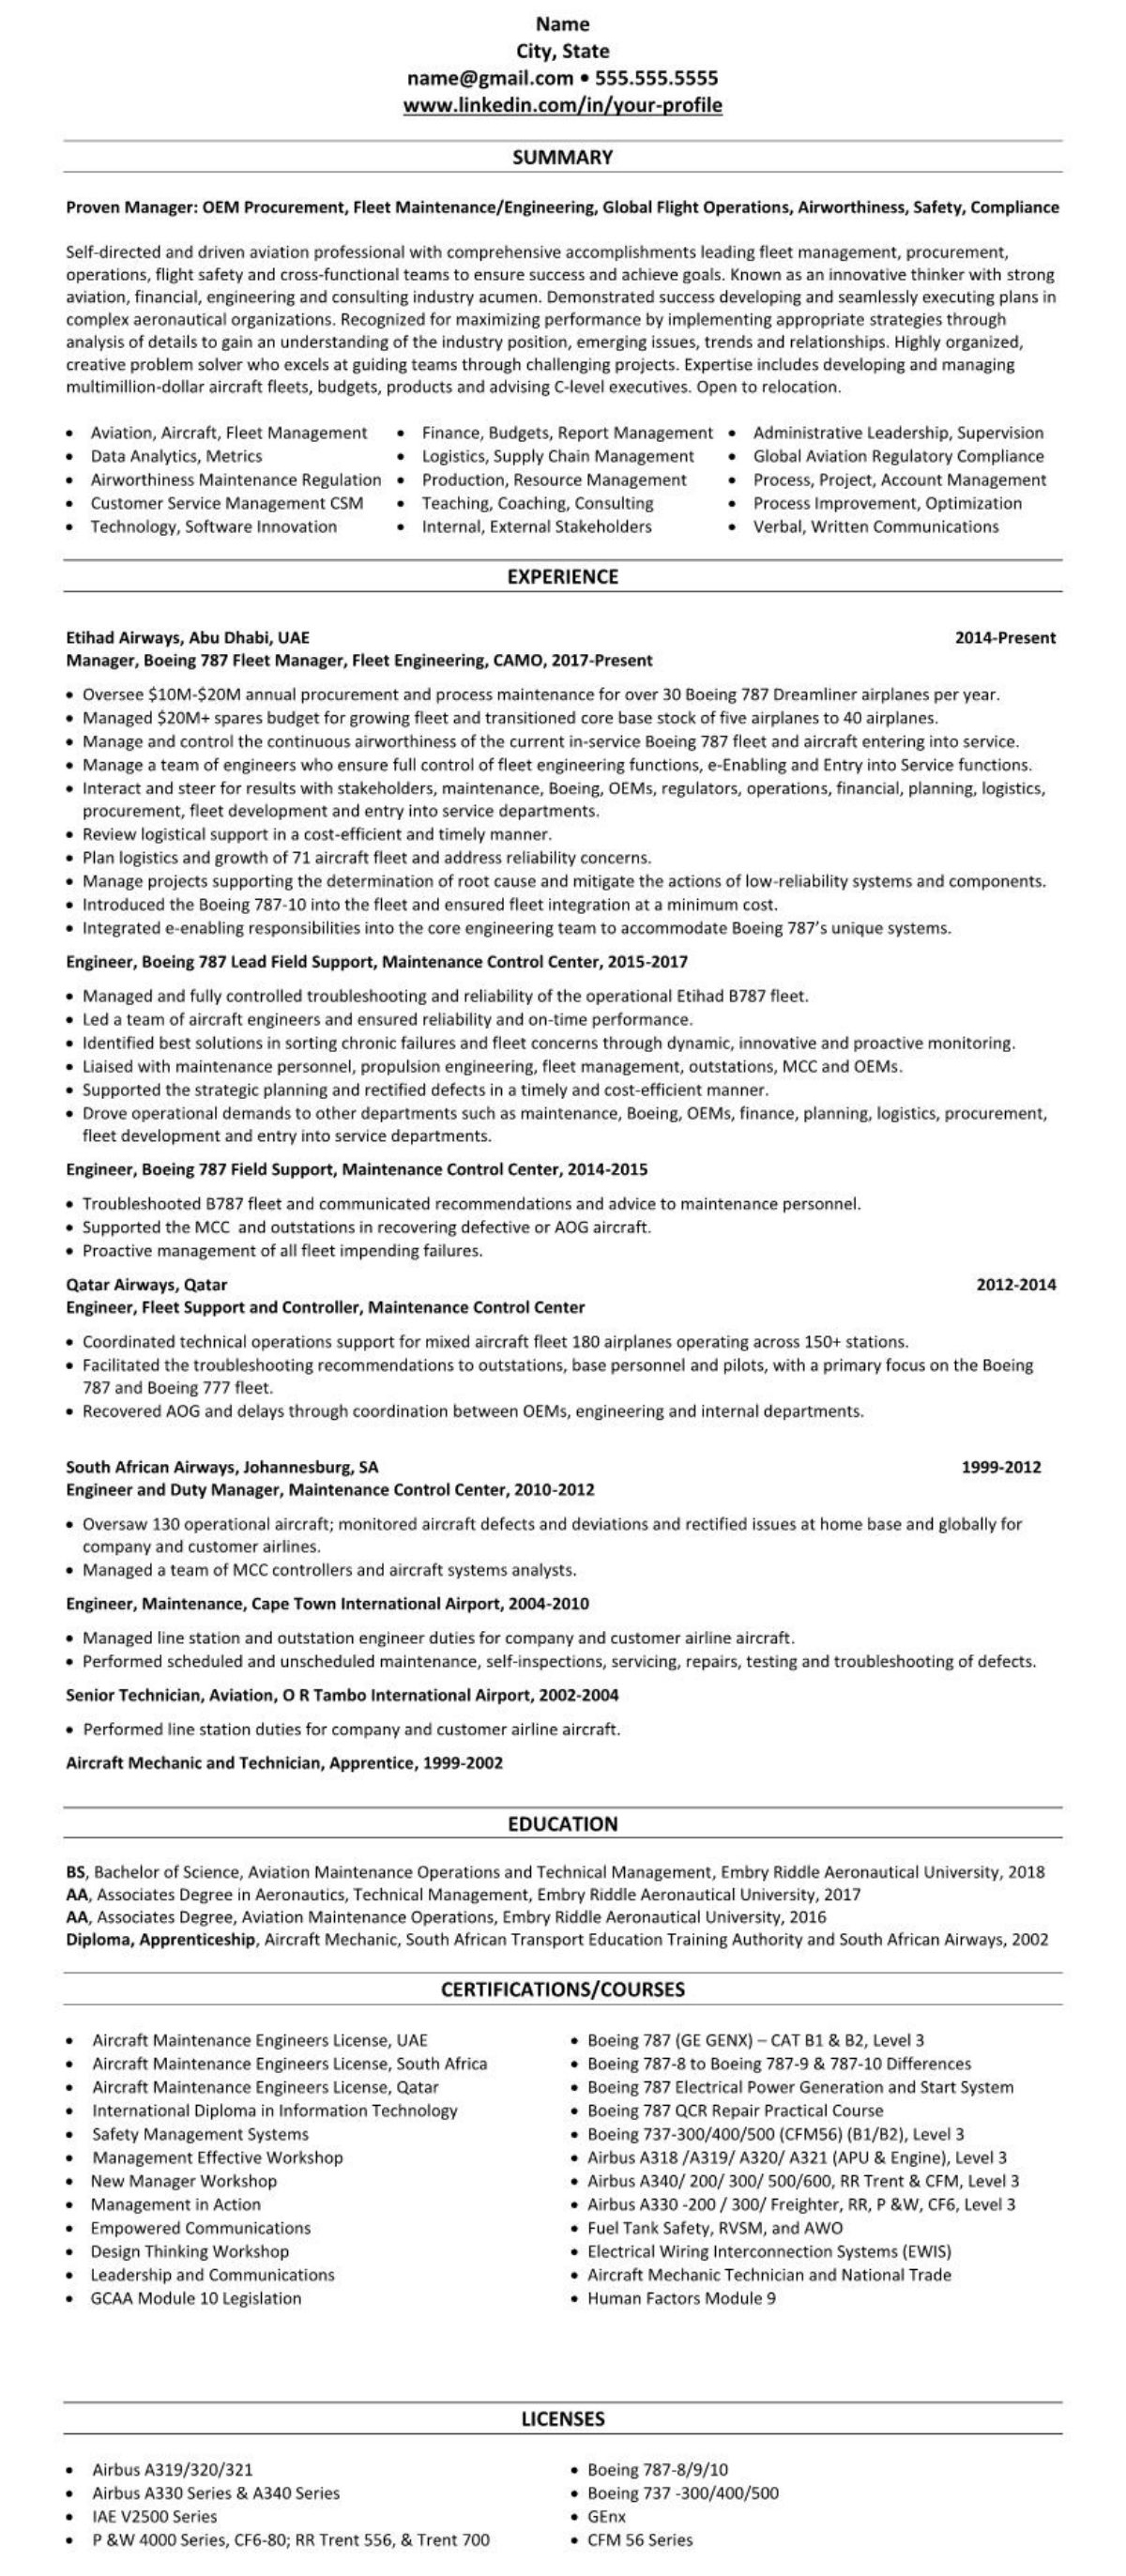 Professional/executive resume example aviation airline aircraft maintenance equipment 2466